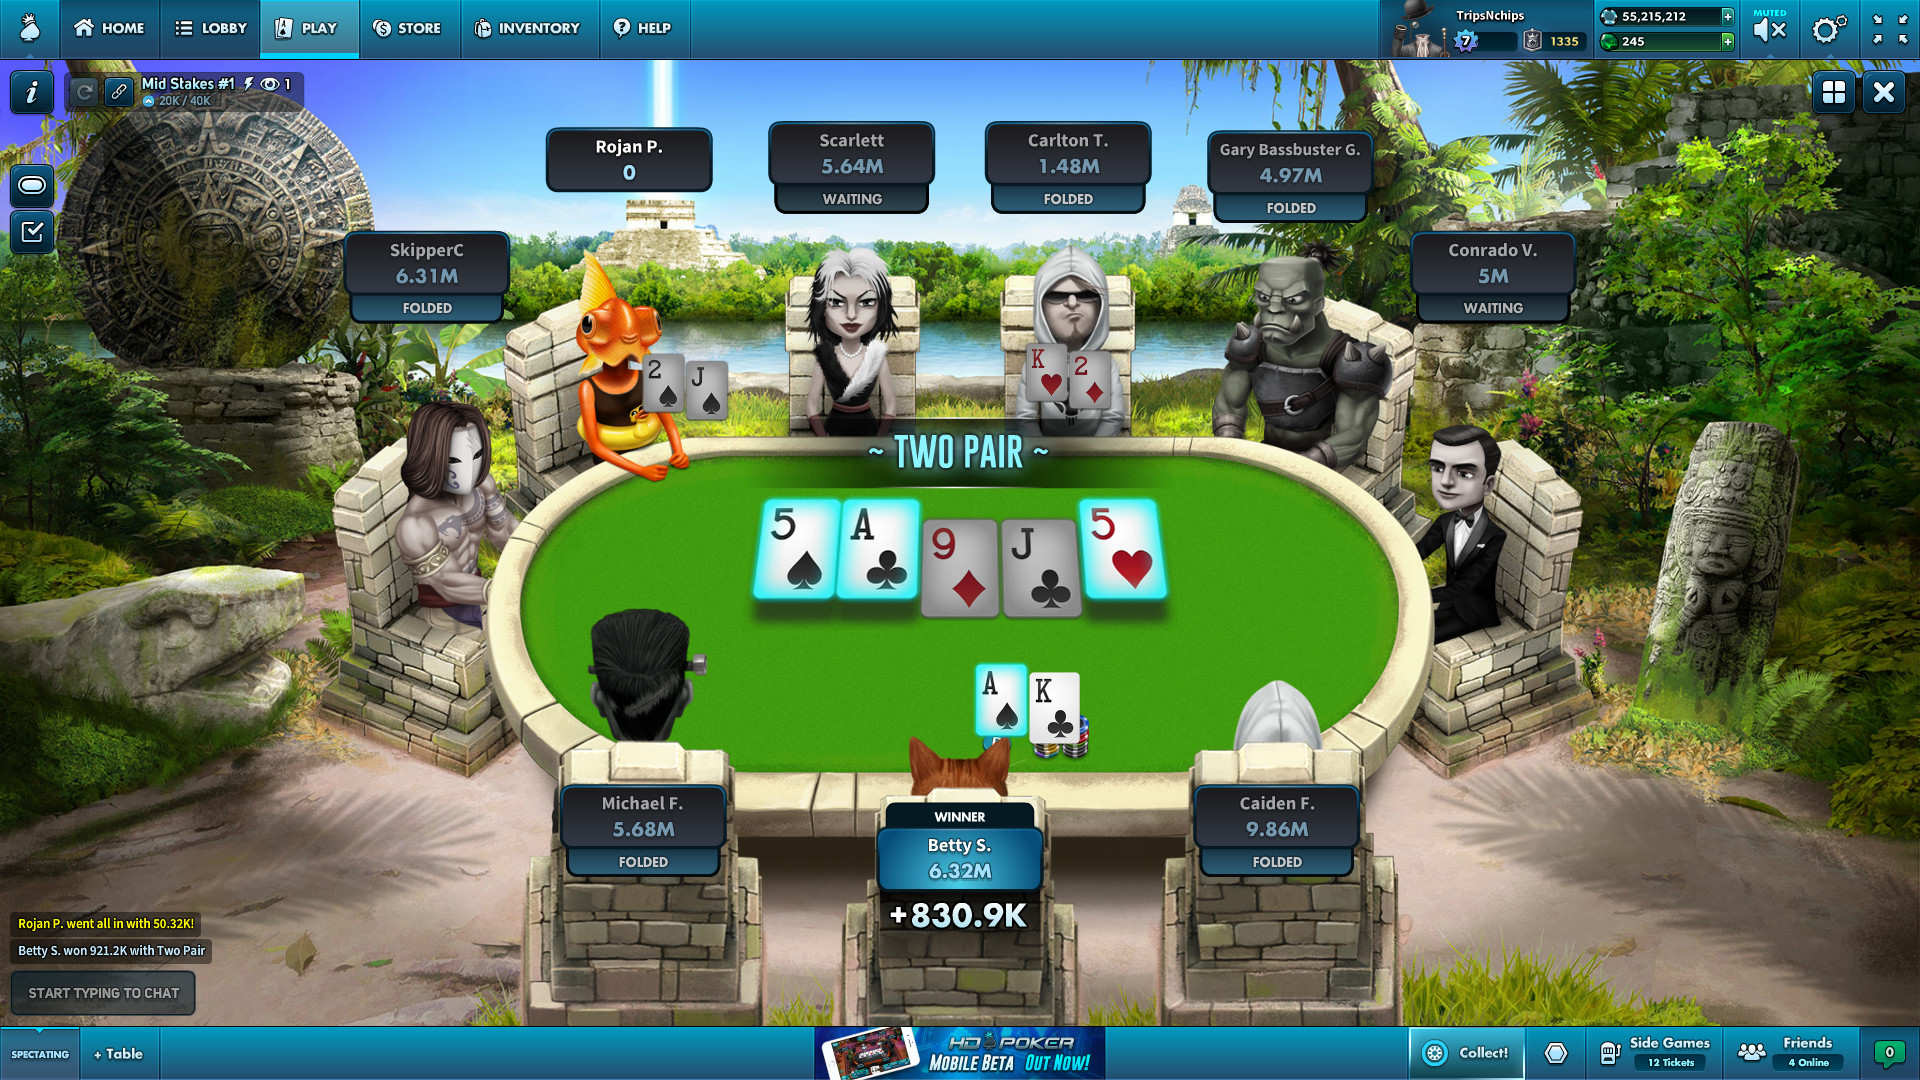 texas holdem computer game free download